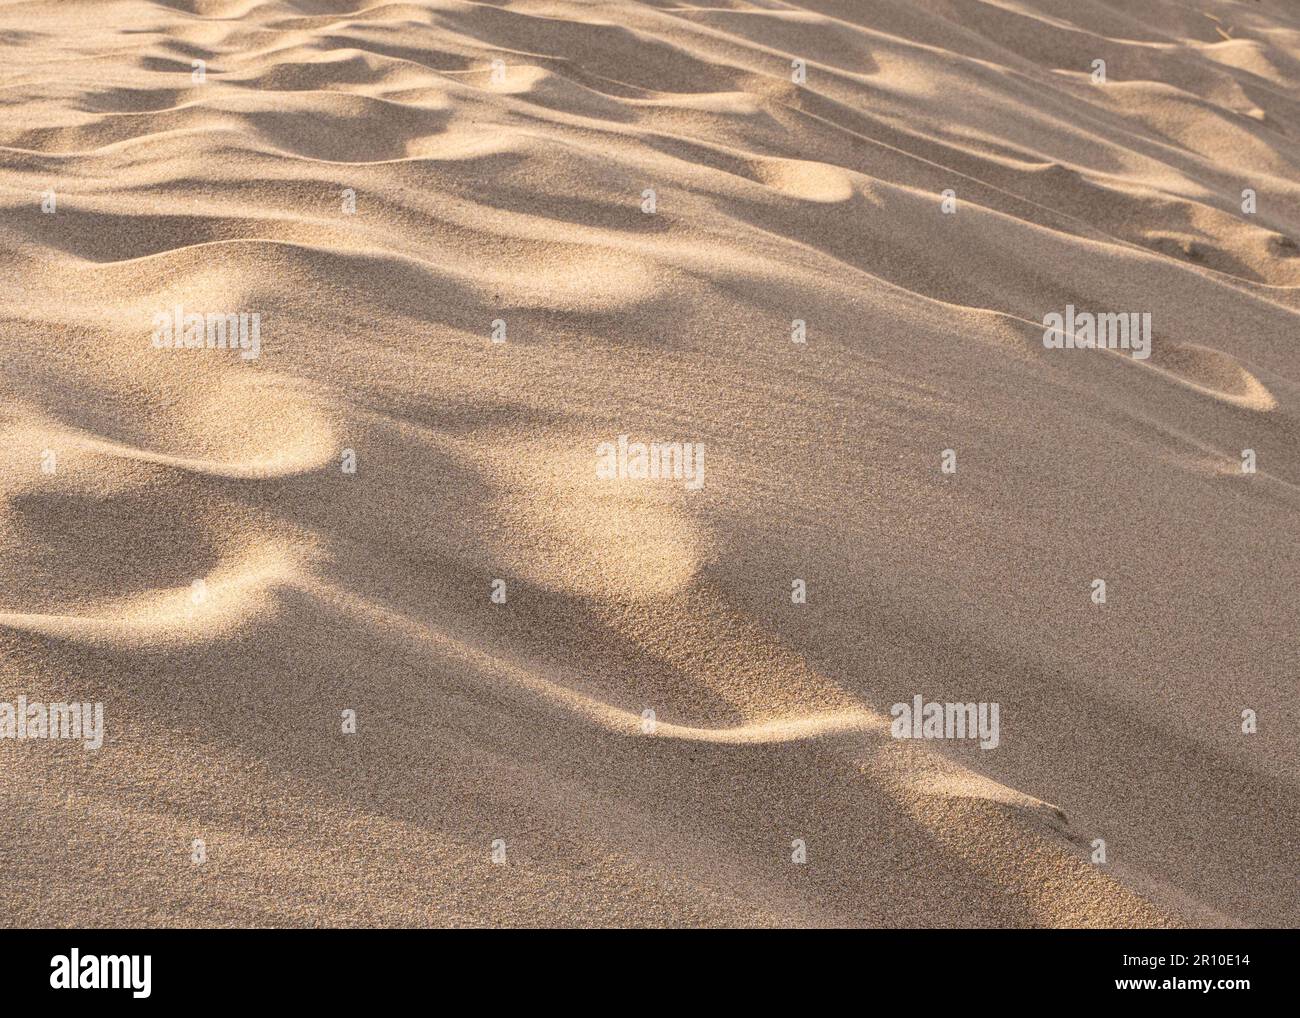 Close-up detail view of sand on sand dunes at the beach Stock Photo